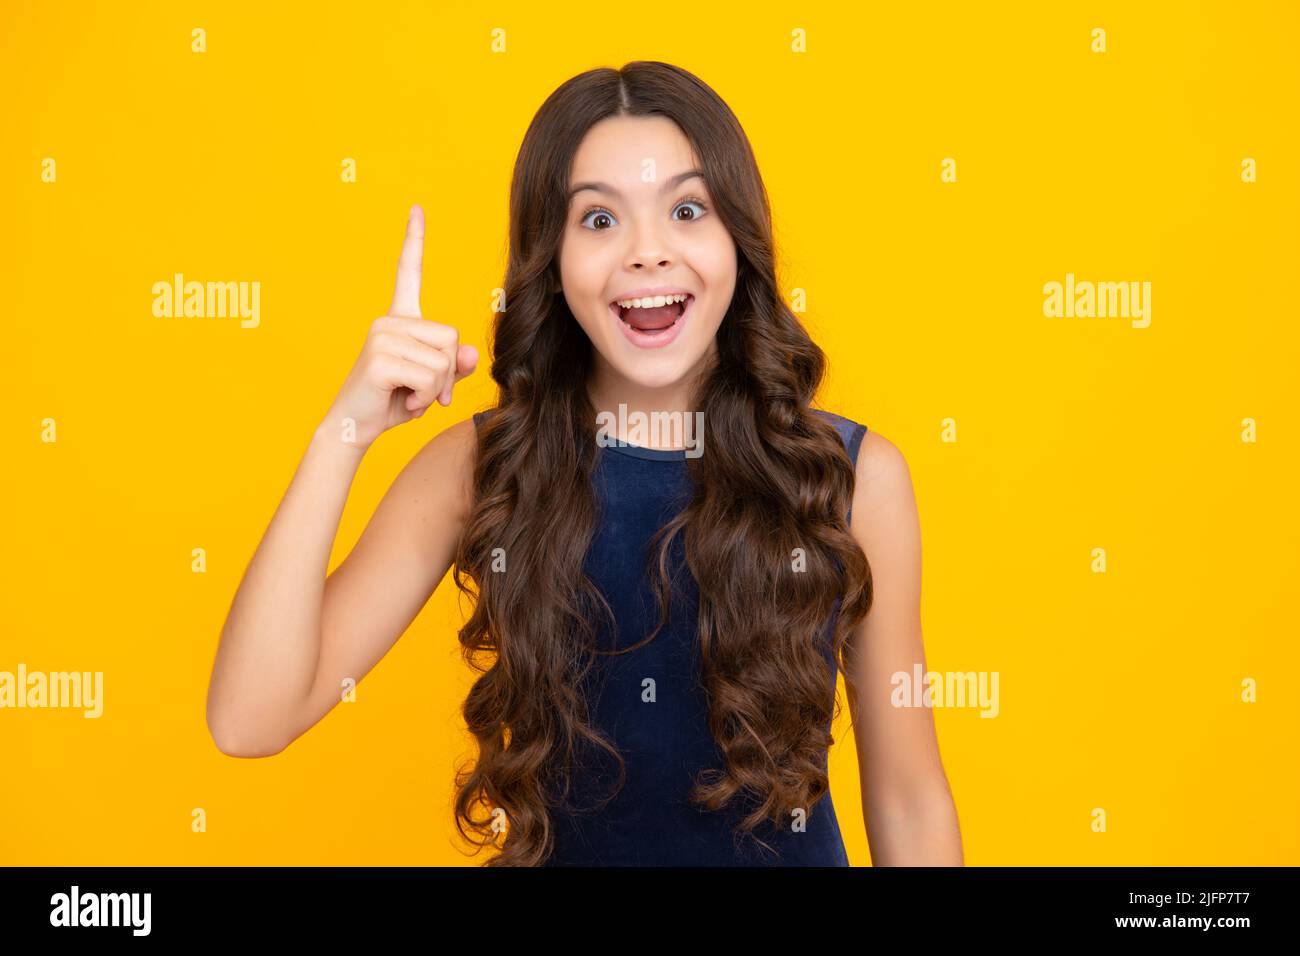 Excited face, cheerful emotions of teenager girl. Portrait of young teenager pointing up with finger, isolated on yellow background. Funny school girl Stock Photo